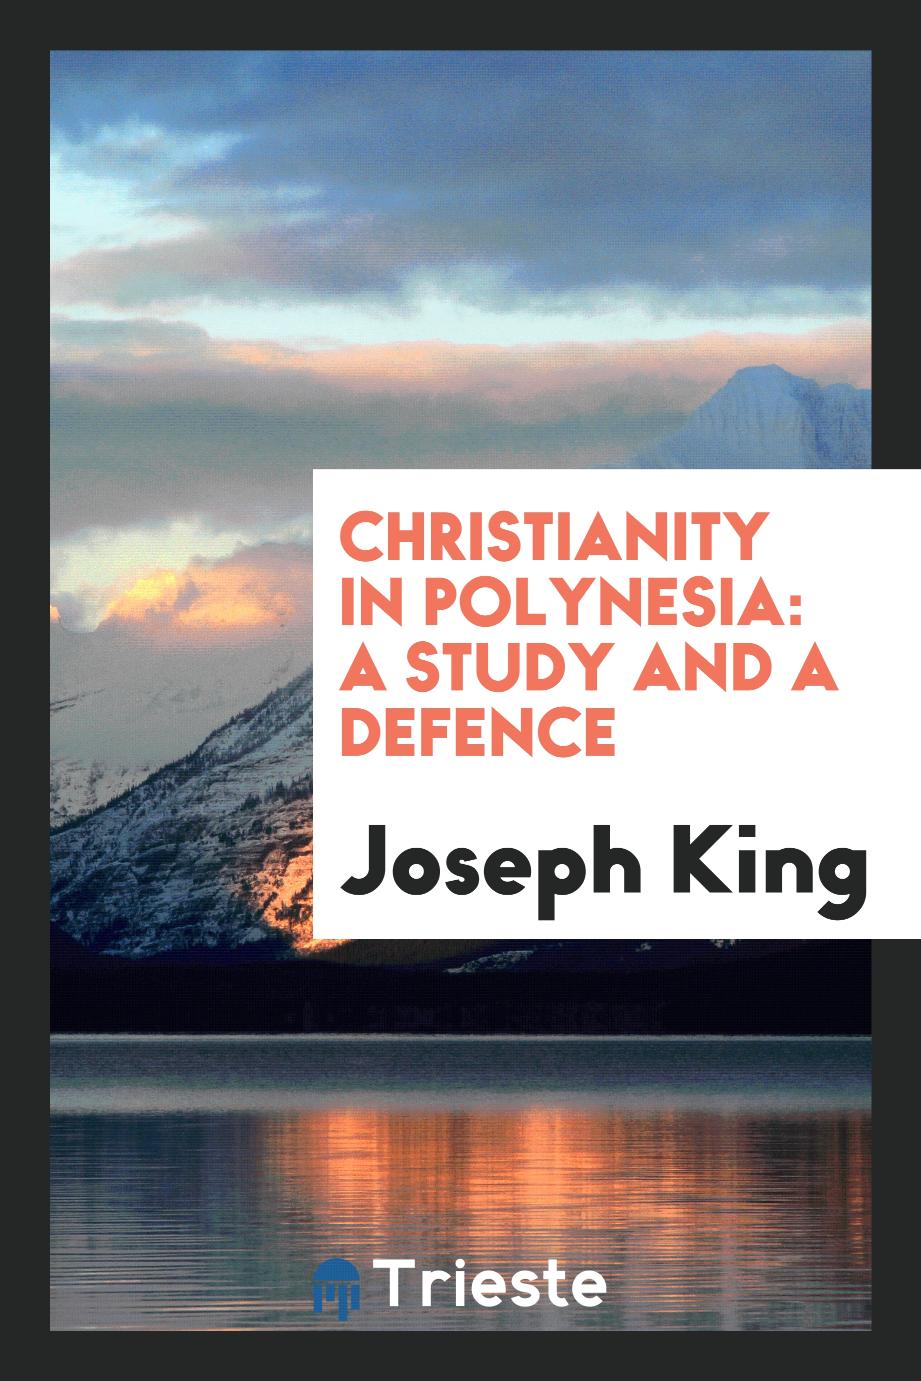 Christianity in Polynesia: A Study and a Defence